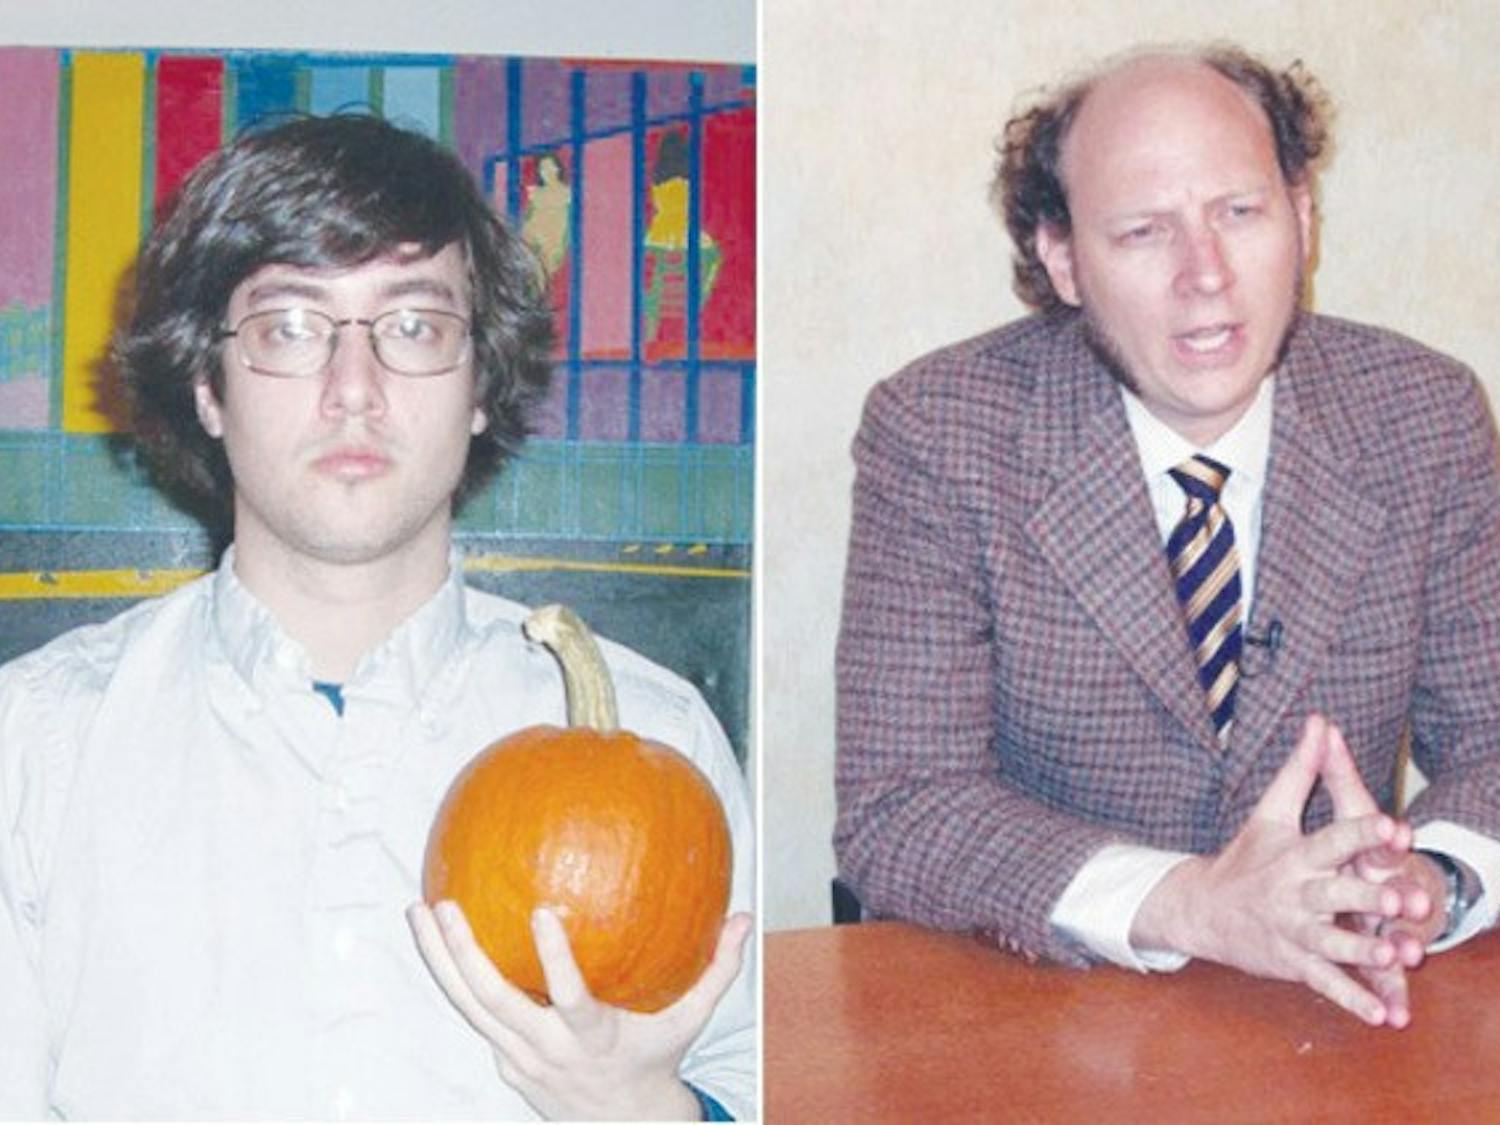 On the left, Sam Means '03; on the right, his racist, stuffy academic alter ego C.H. Dalton, the author of 